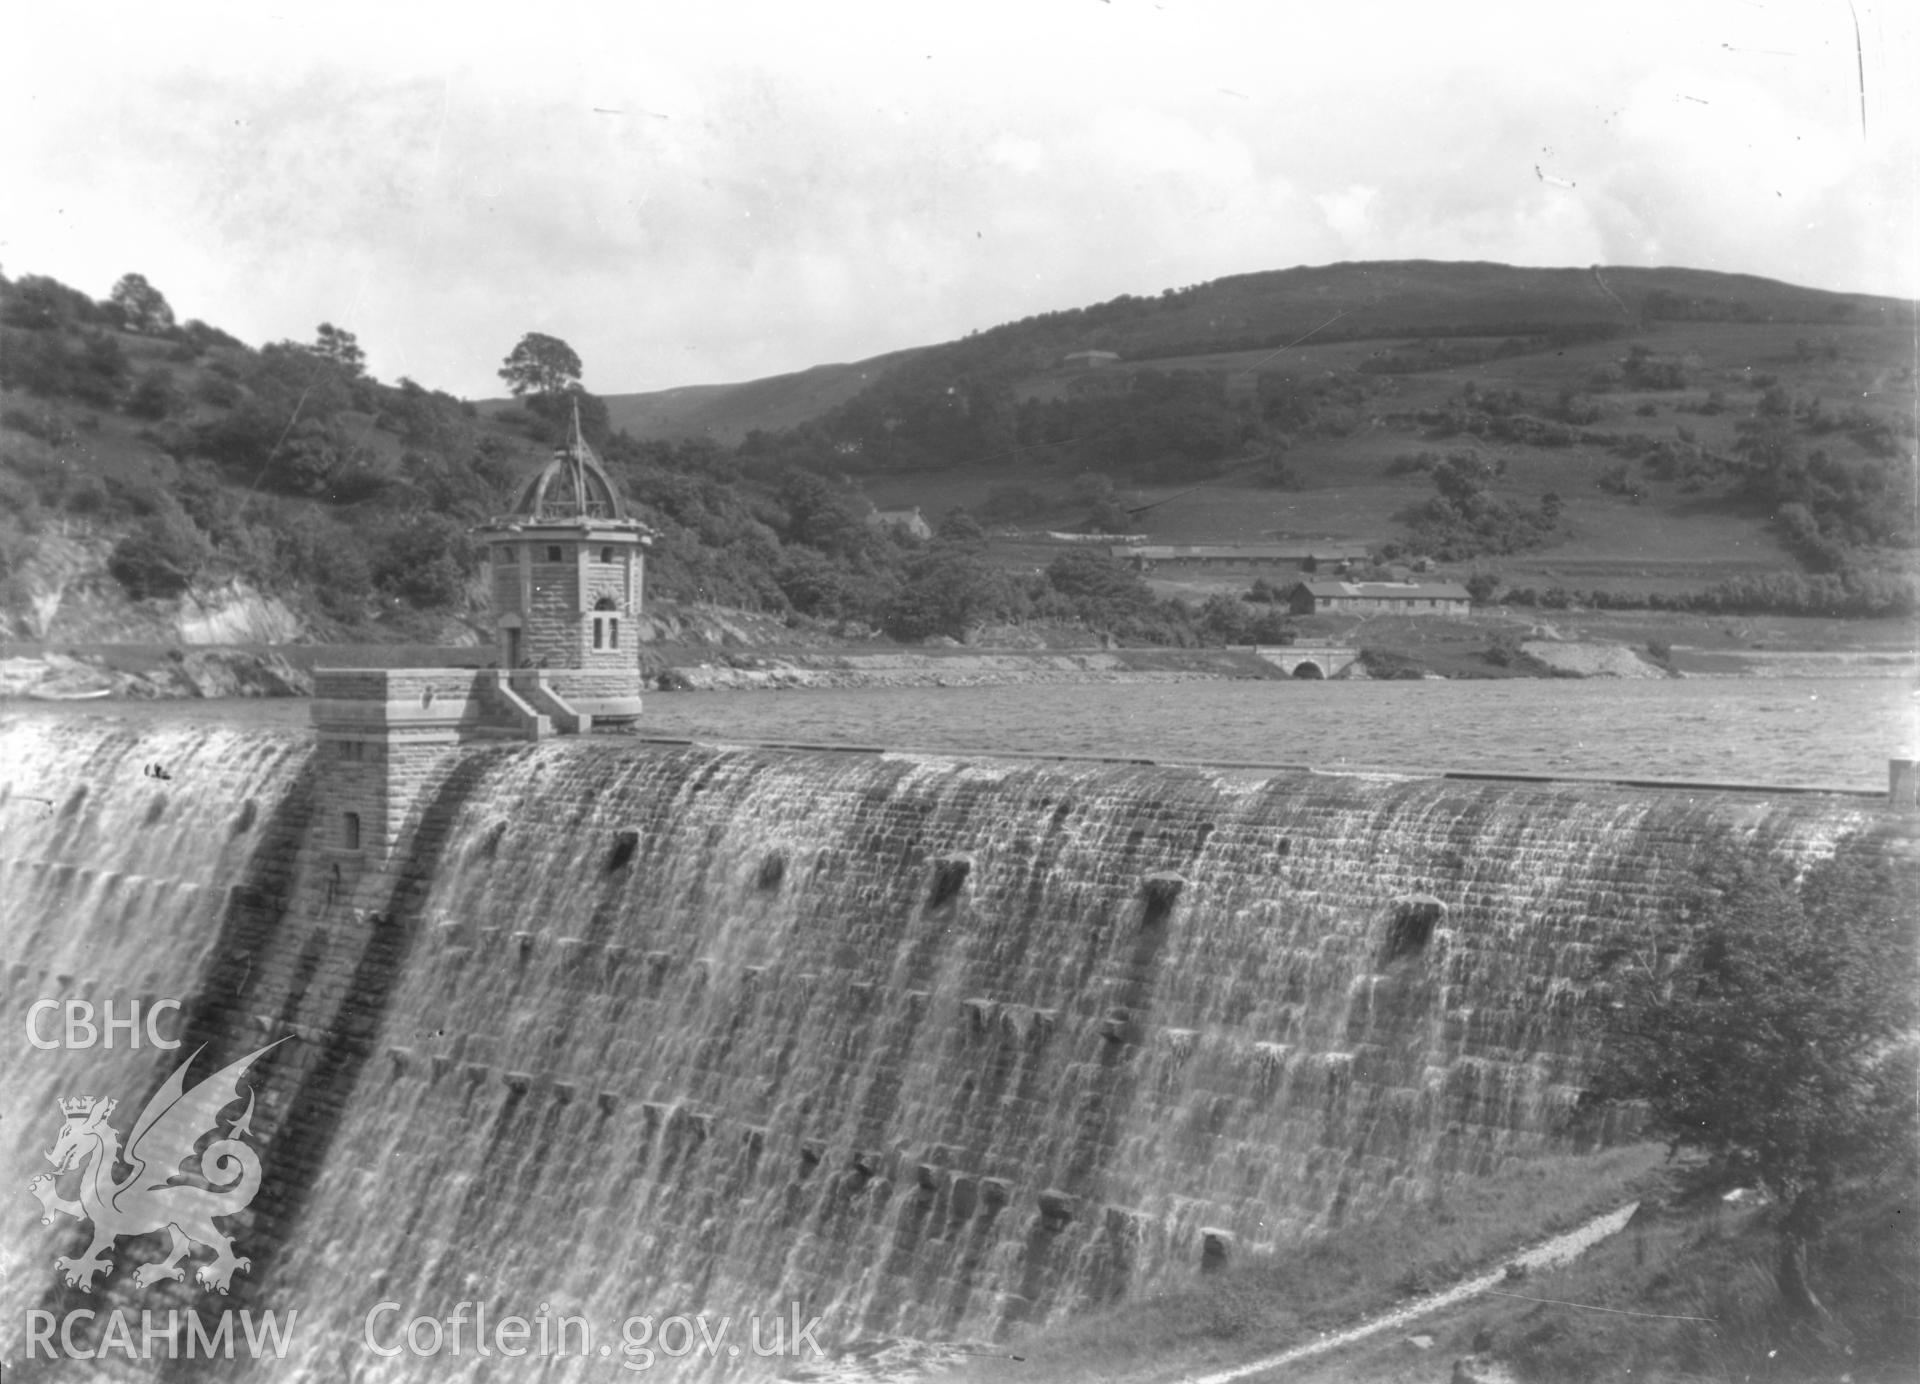 Black and white acetate negative showing a view of Elan Valley Reservoir.